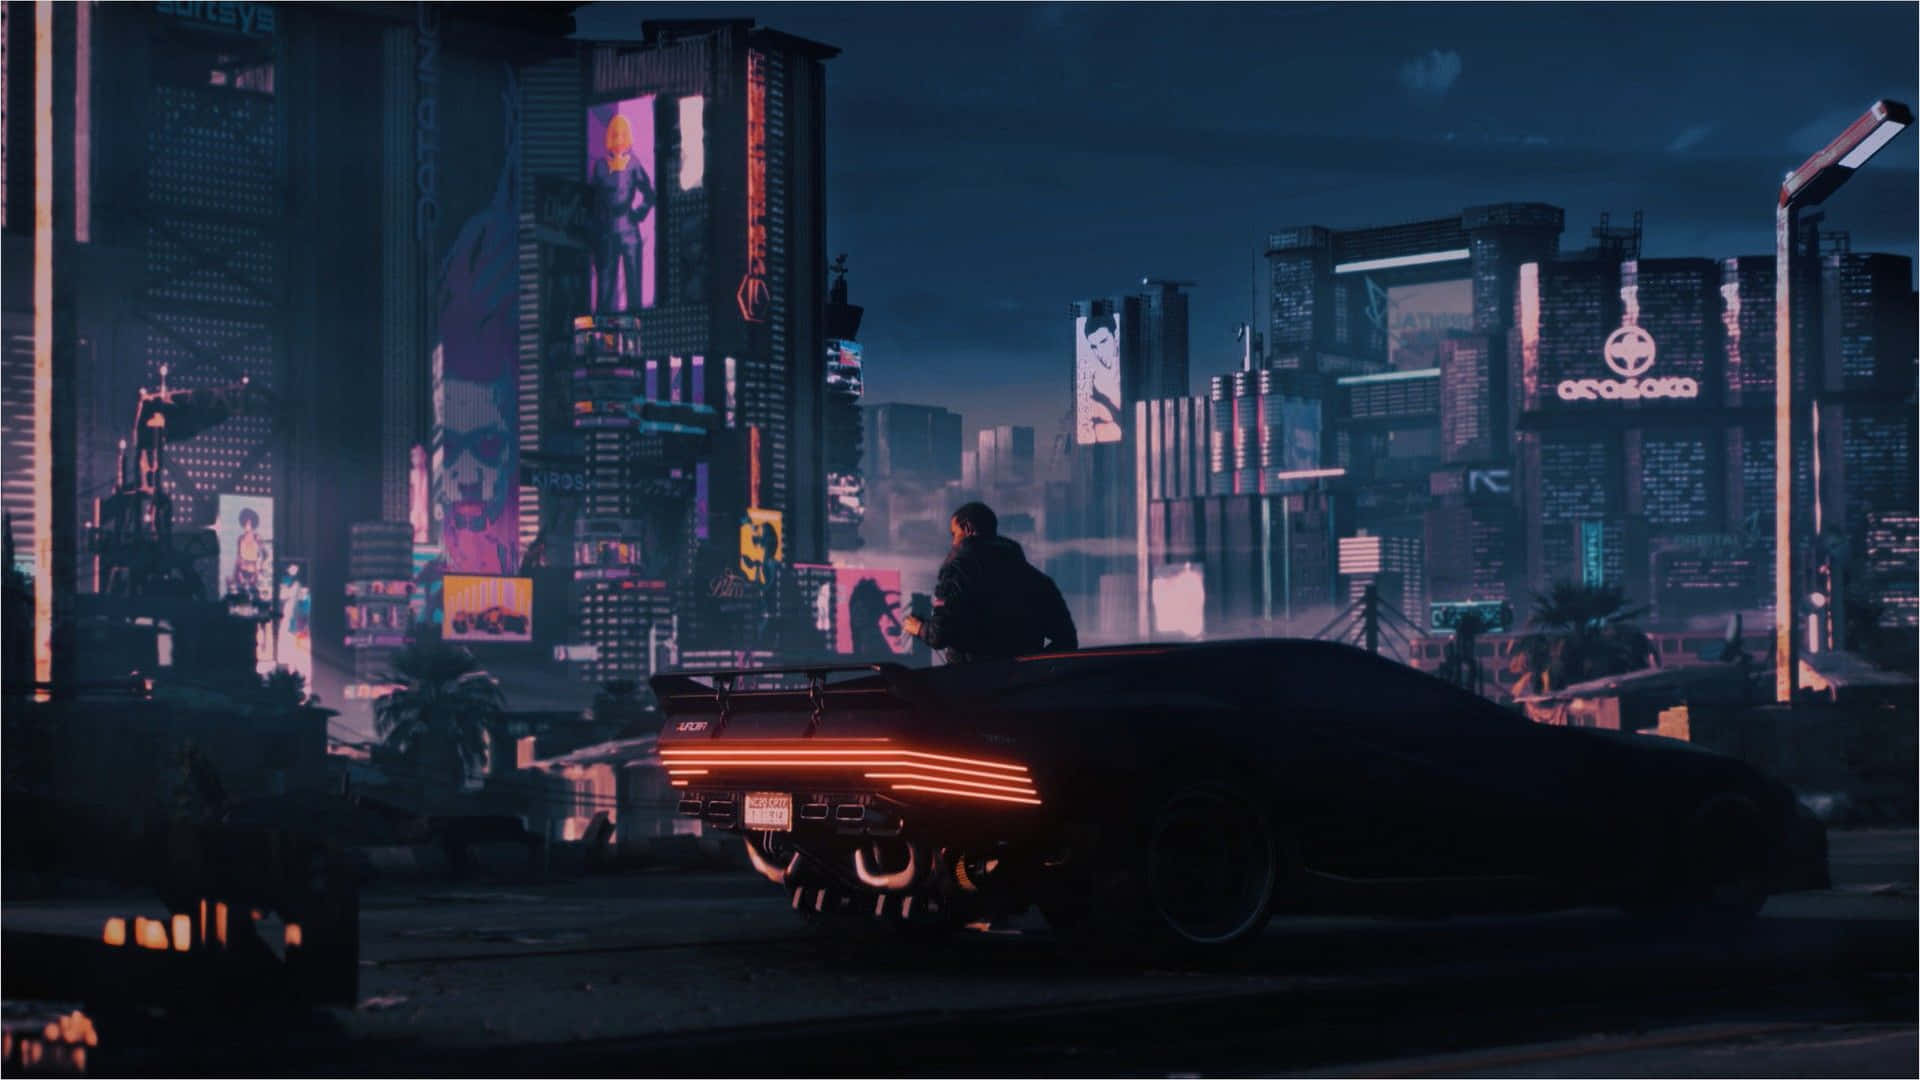 A person sitting on the back of a car in a futuristic city - Cyberpunk 2077